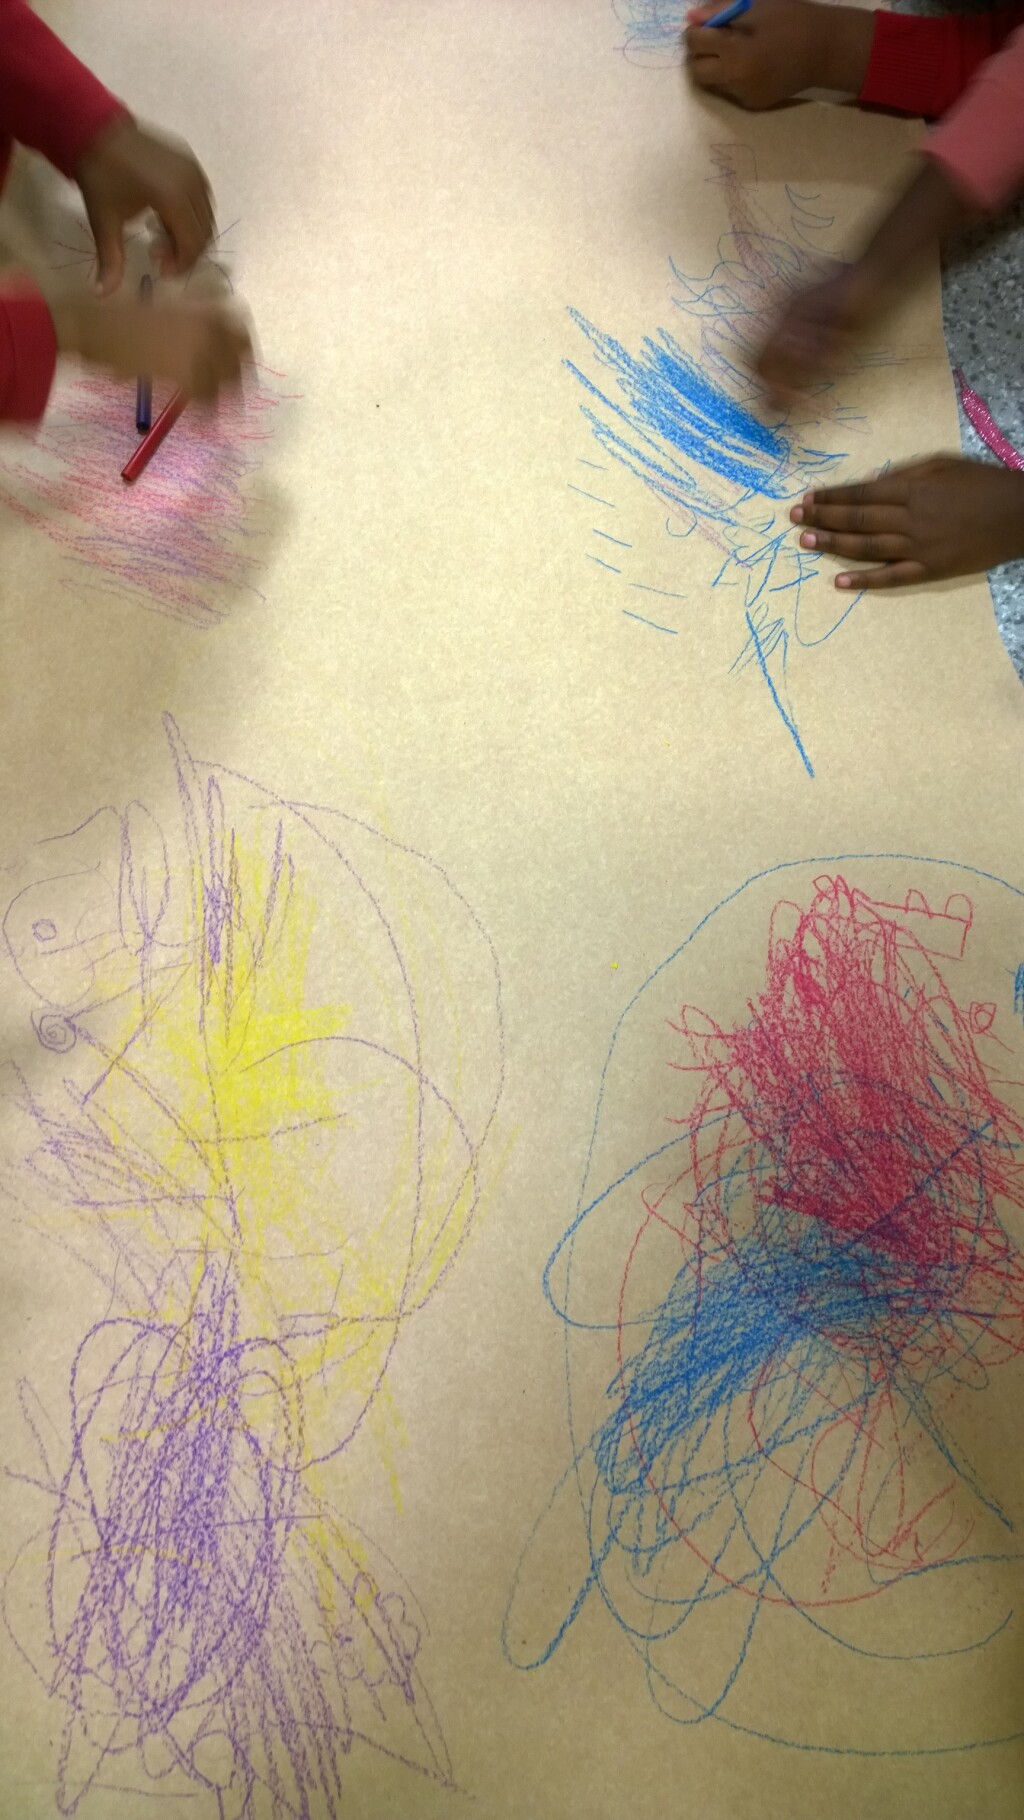 Children creating different marks with coloured pencils on a large sheet of paper